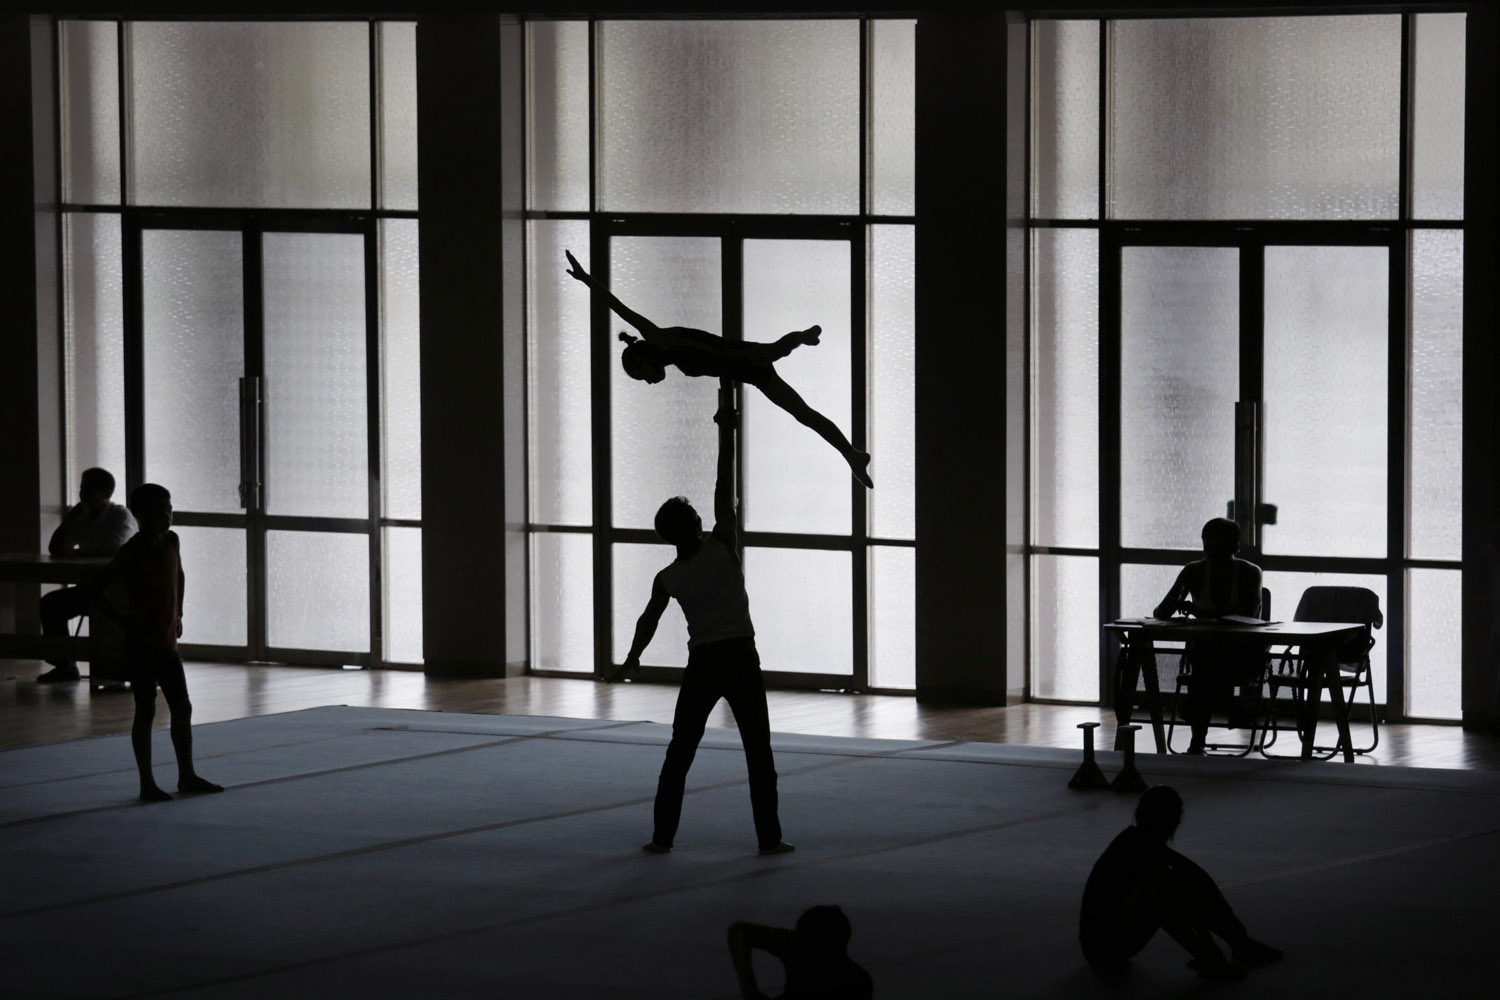 Gymnasts are silhouetted as they practice their routine in Pyongyang, Sept. 2, 2014. North Korea will soon send its top athletes to what could be the biggest sporting event of their lives and a major national propaganda campaign: the Asian Games in South Korea.